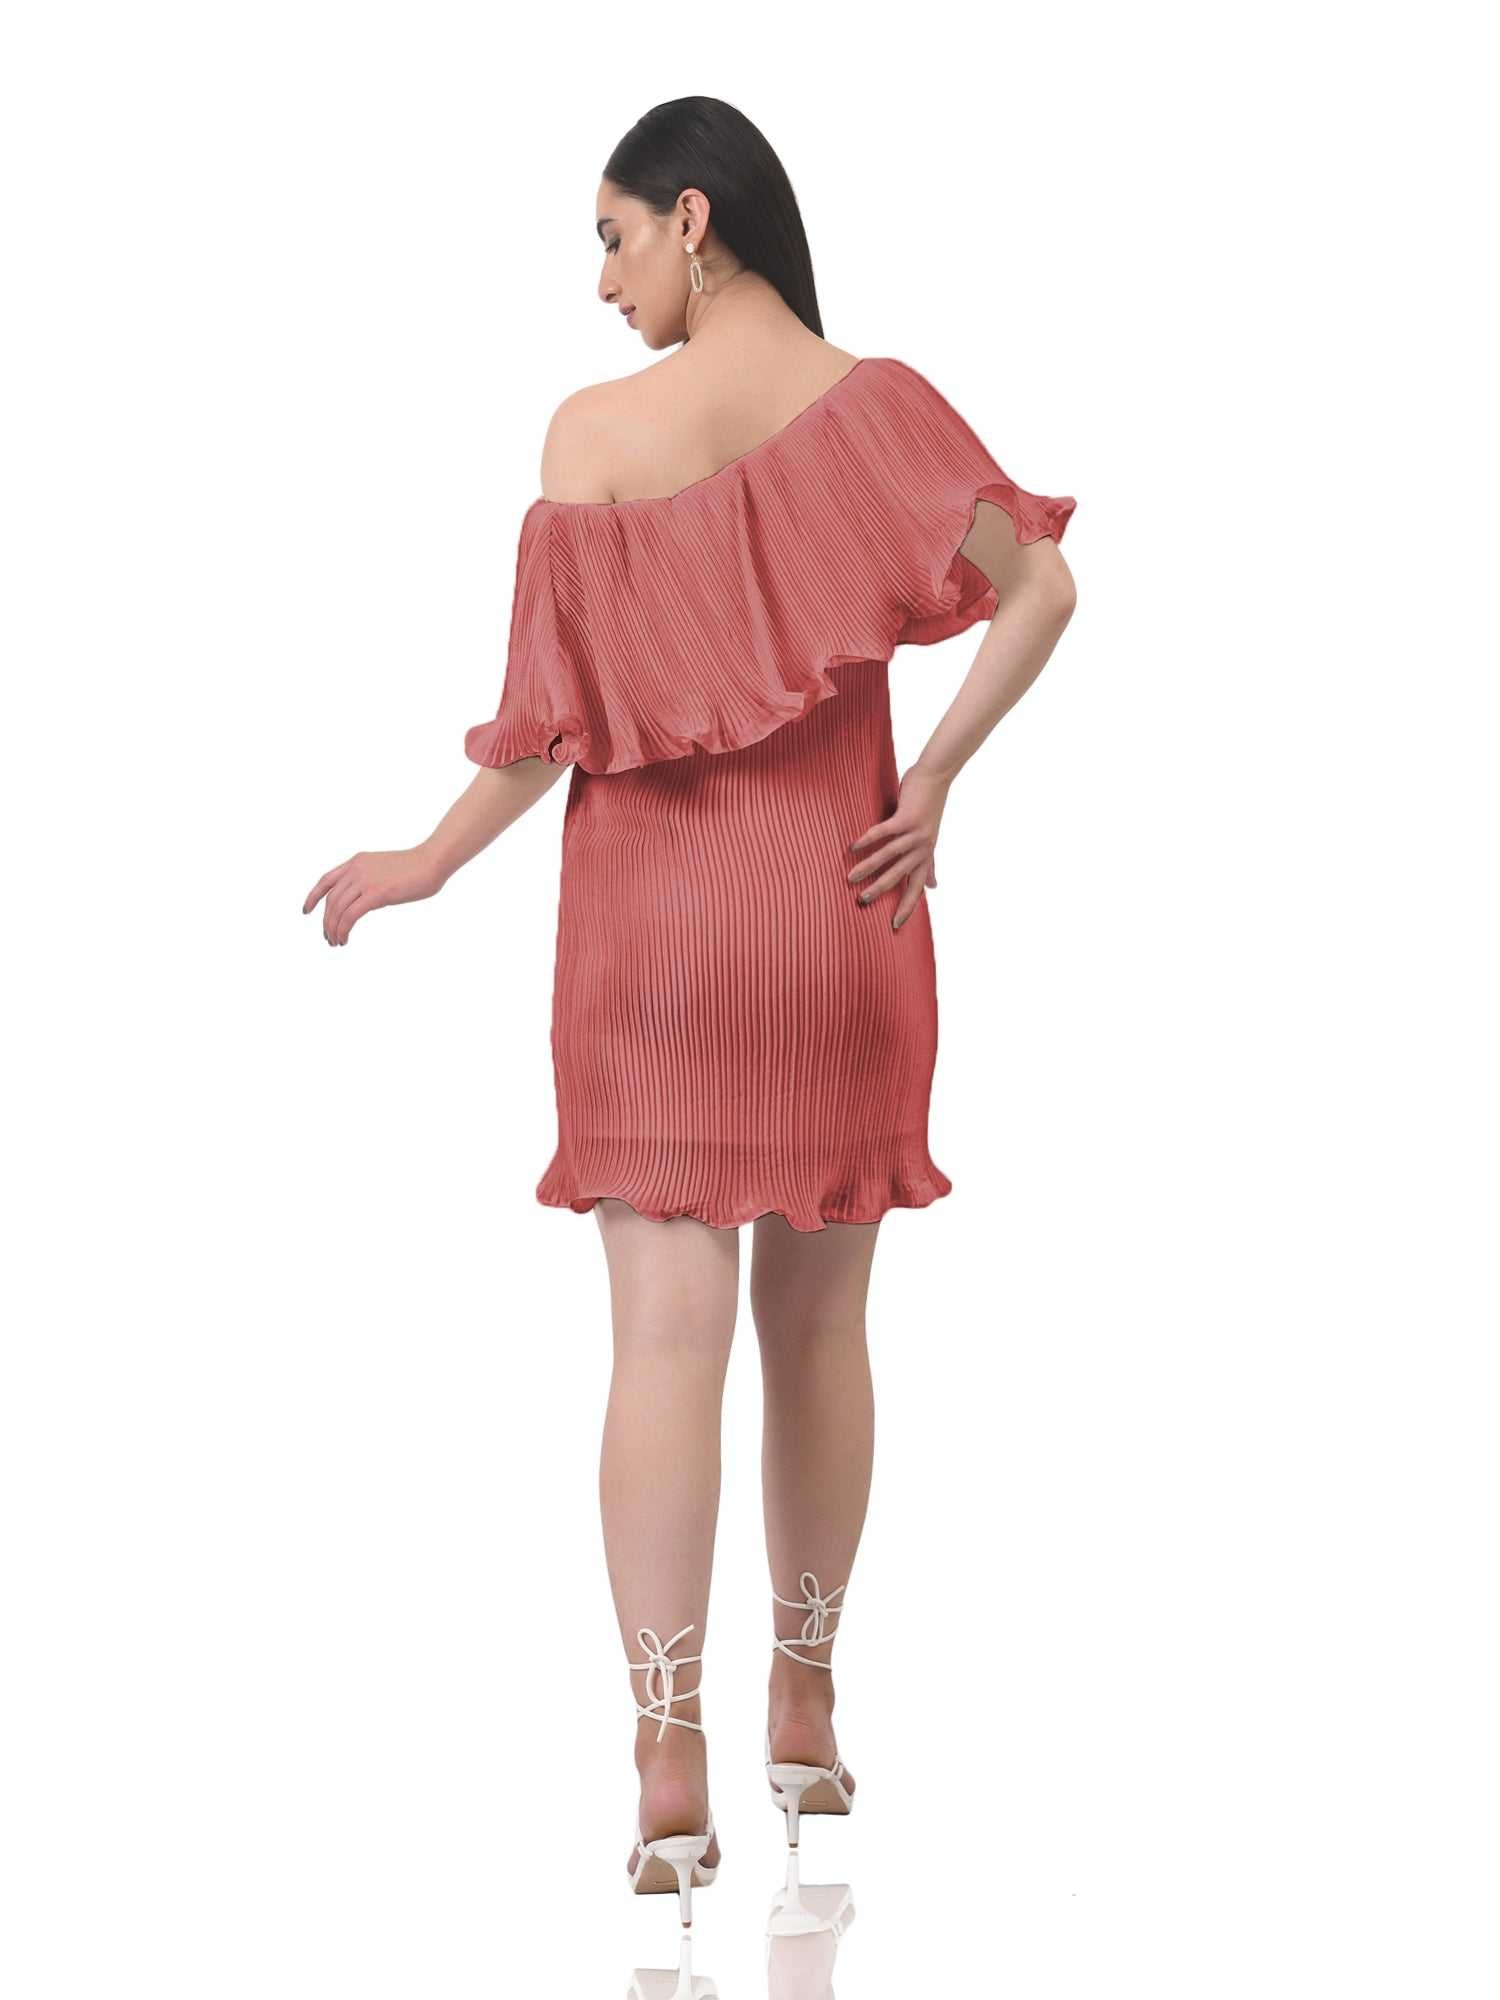 copy of brown imaginative pleated pink dress